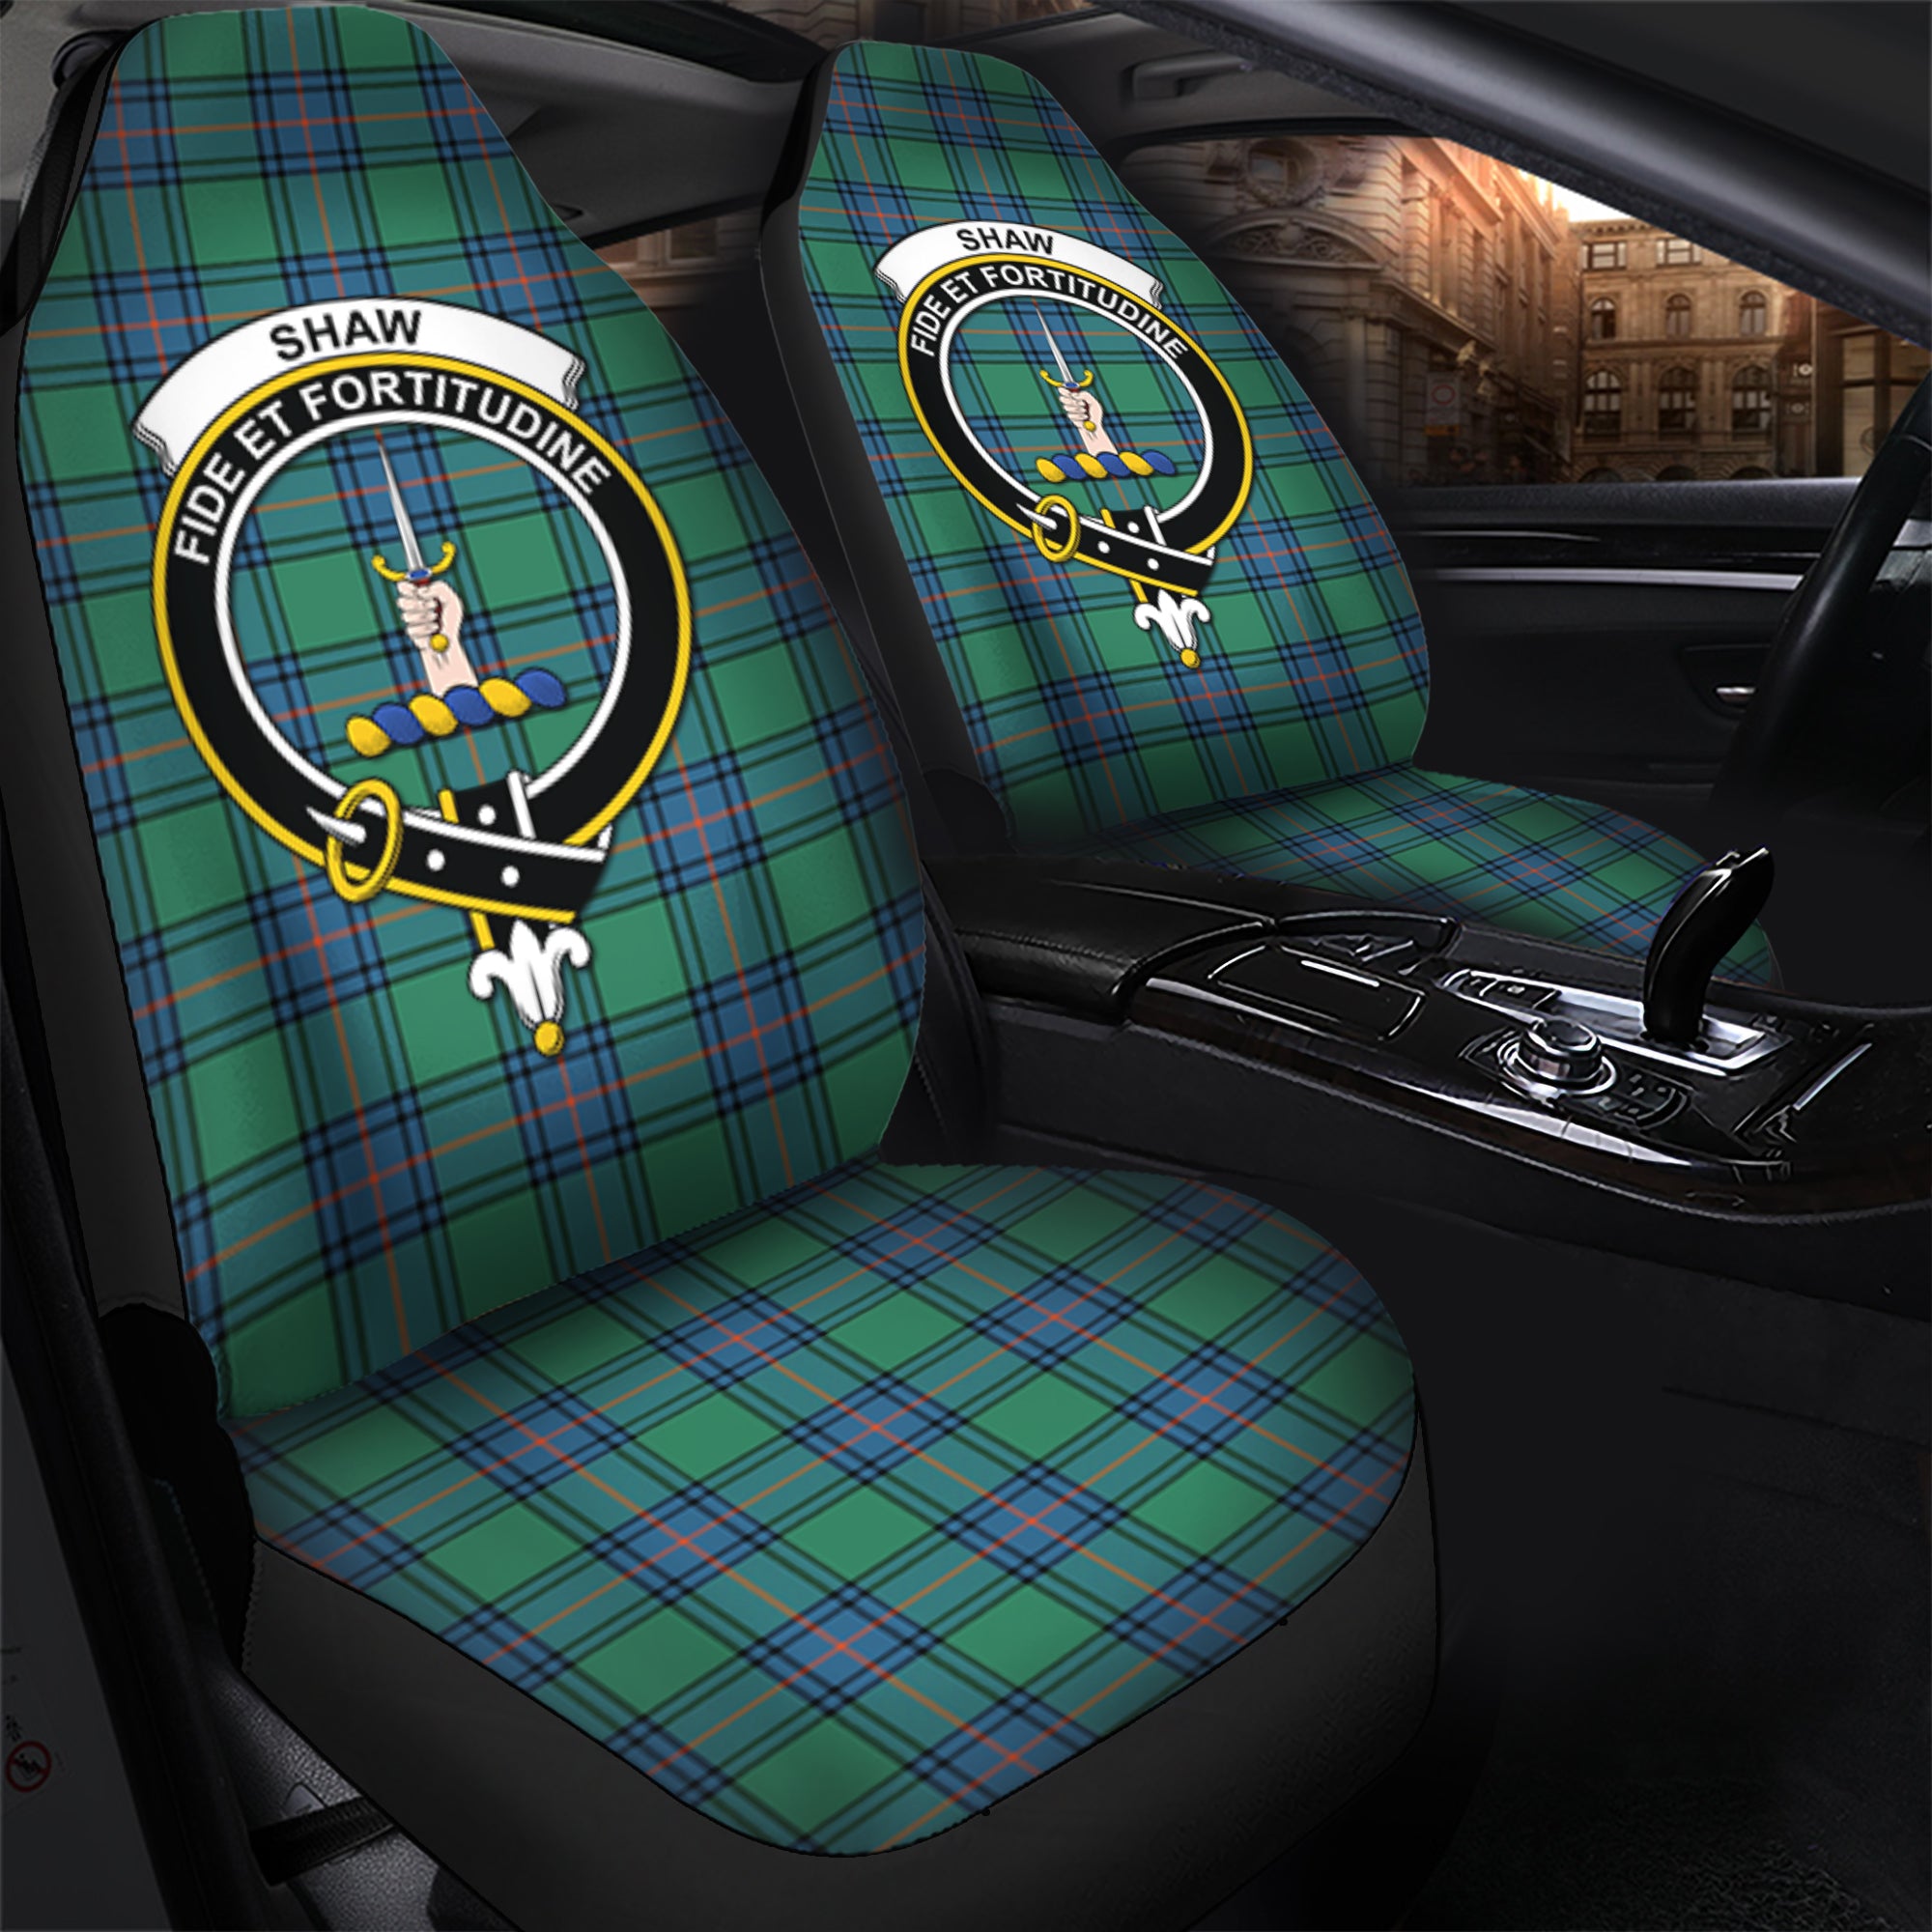 Shaw Ancient Clan Tartan Car Seat Cover, Family Crest Tartan Seat Cover TS23